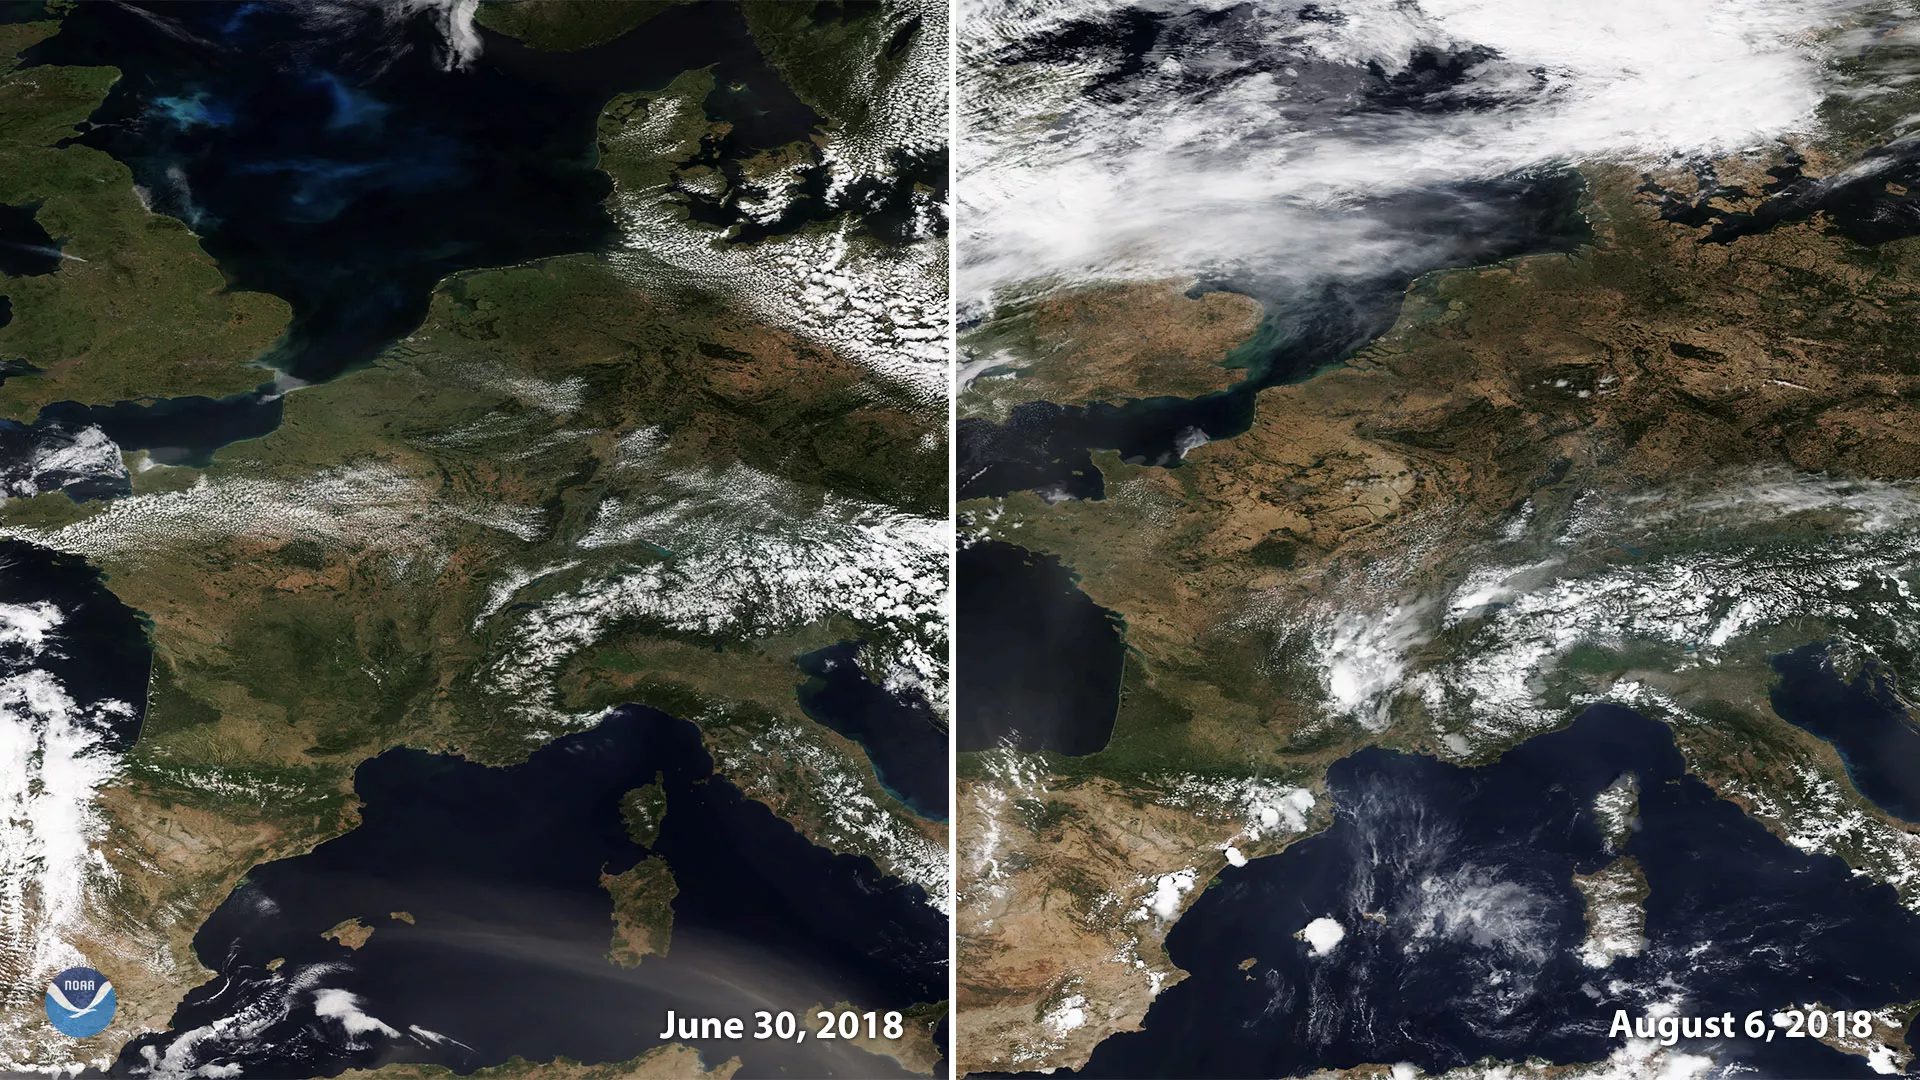 NOAA-20 imagery of Western Europe with numerous fires, comparing TrueColor imagery from June 2018 to August 2018.